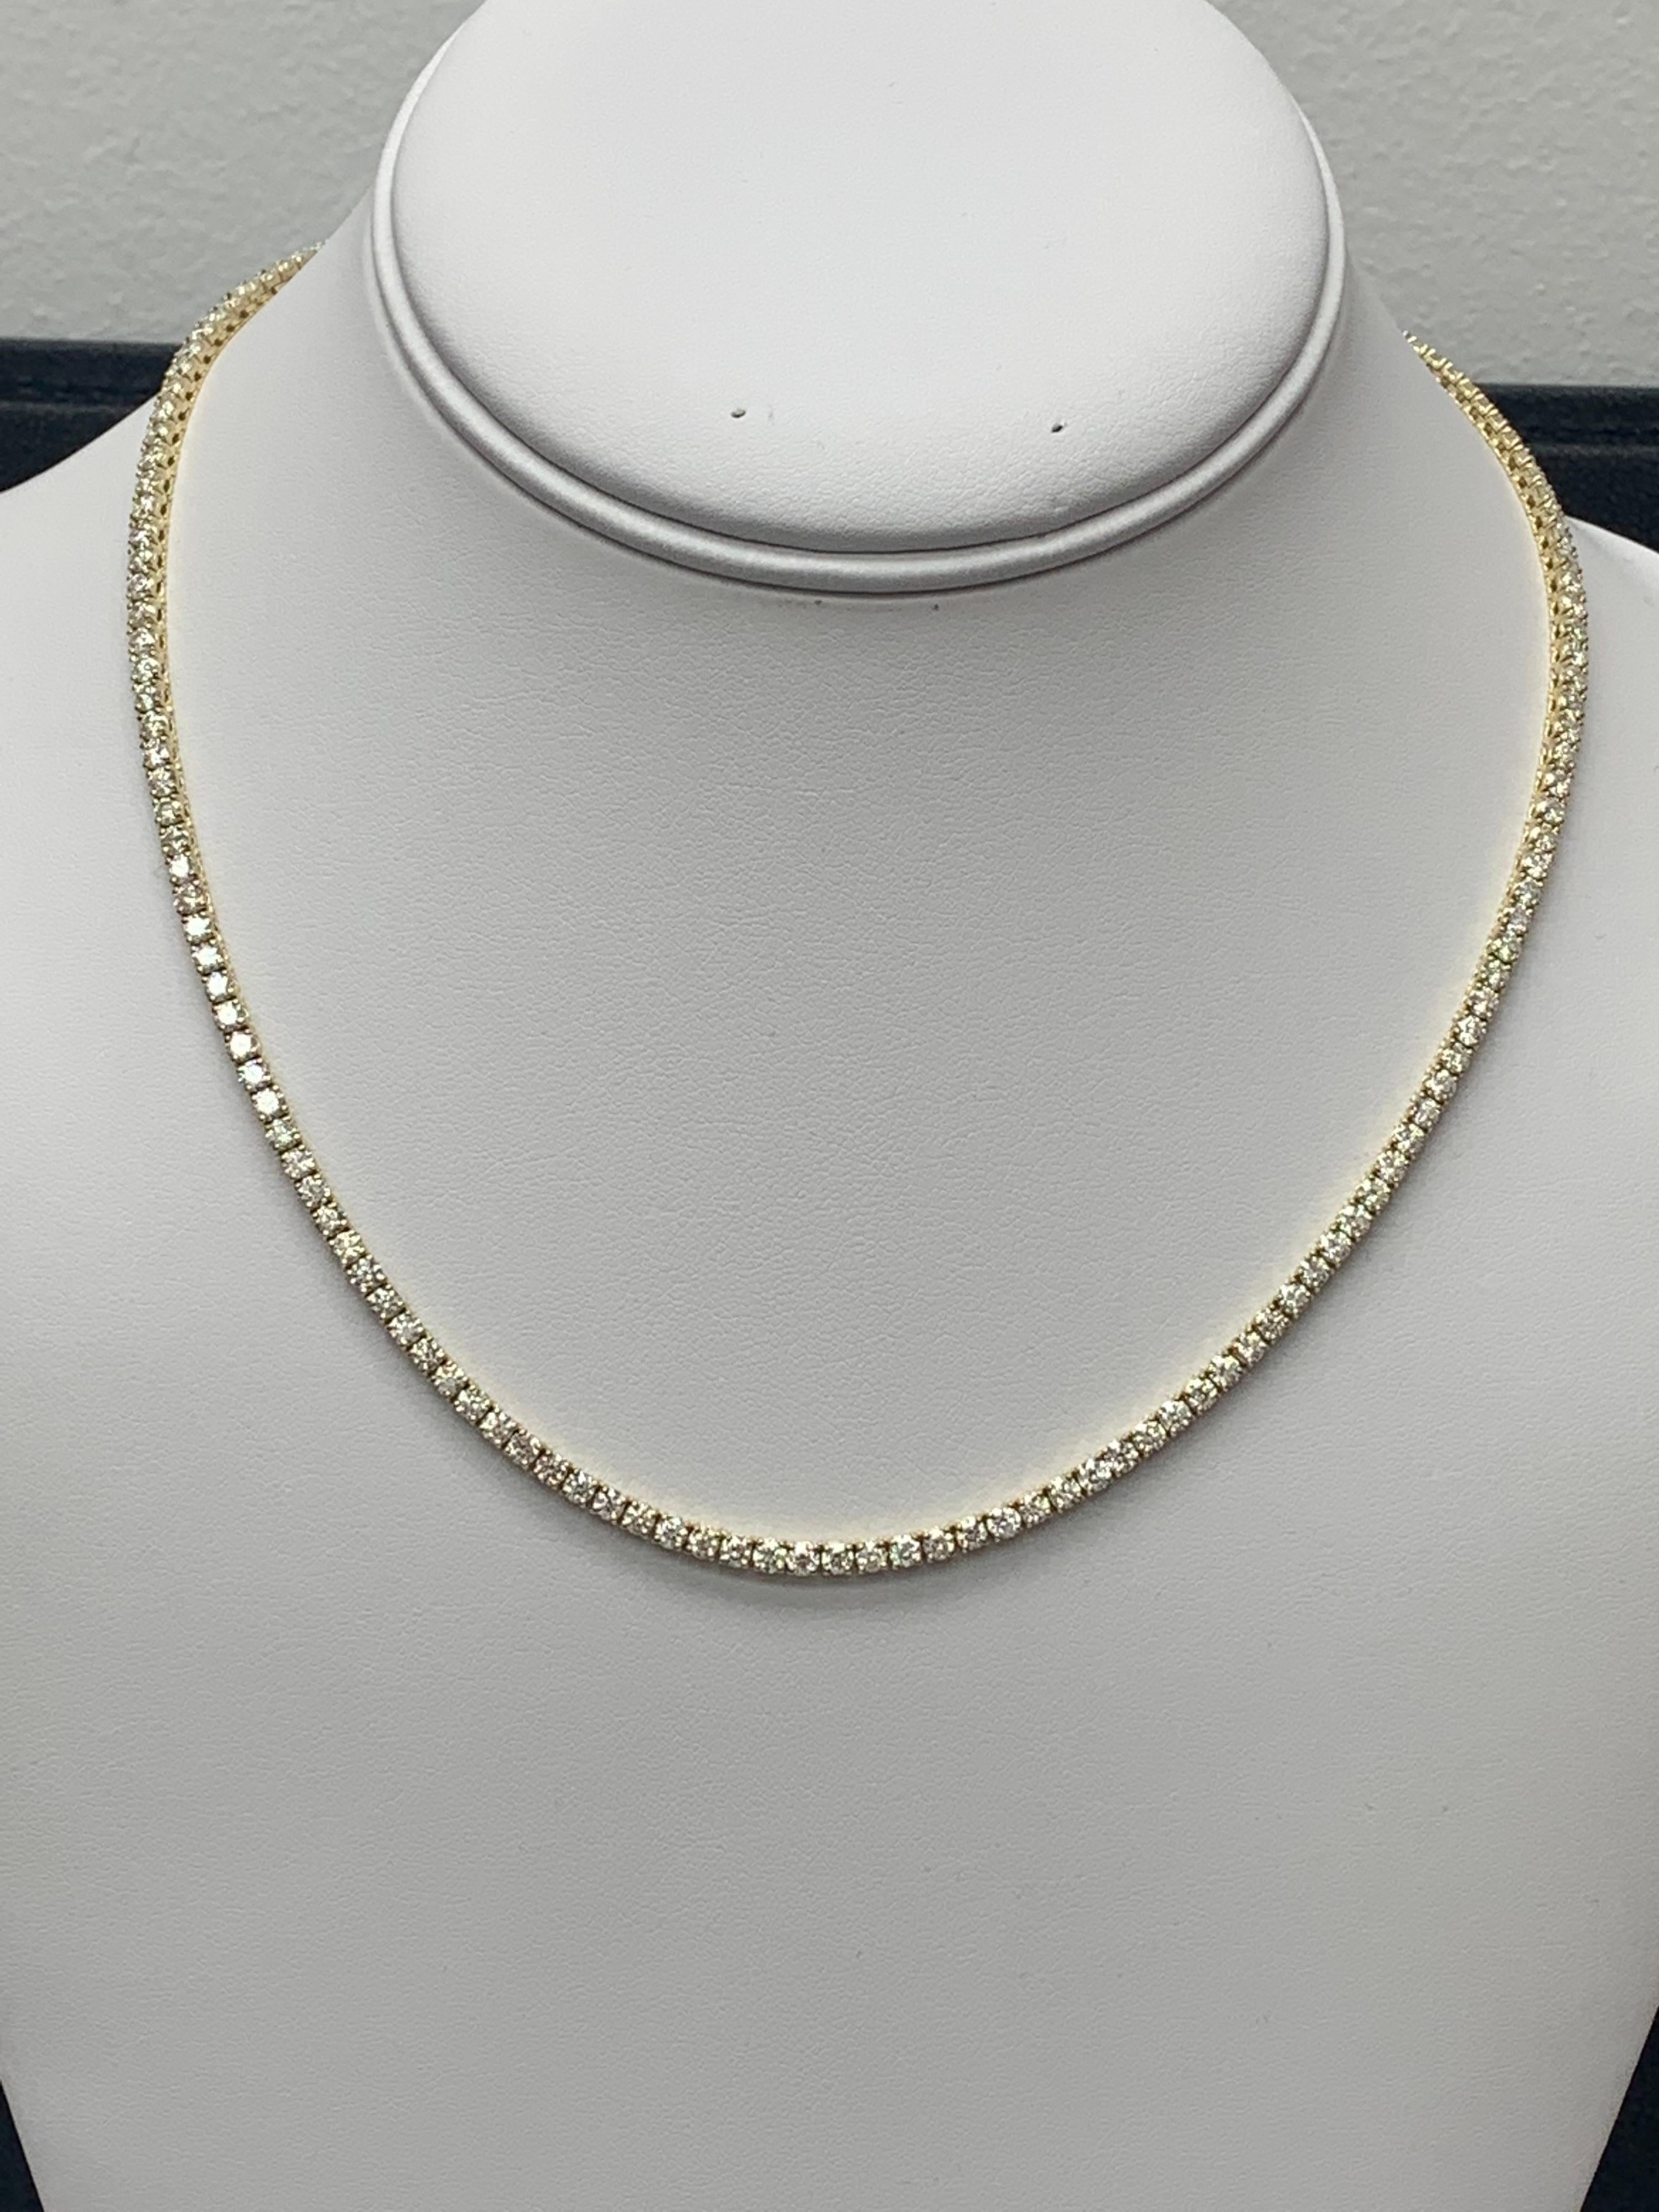 A brilliant and classic piece showcasing a line of round diamonds set in 14K Yellow Gold. 156 diamonds in this necklace are brilliant round cut and weigh 11.31 carats in total. 16 inches in length.